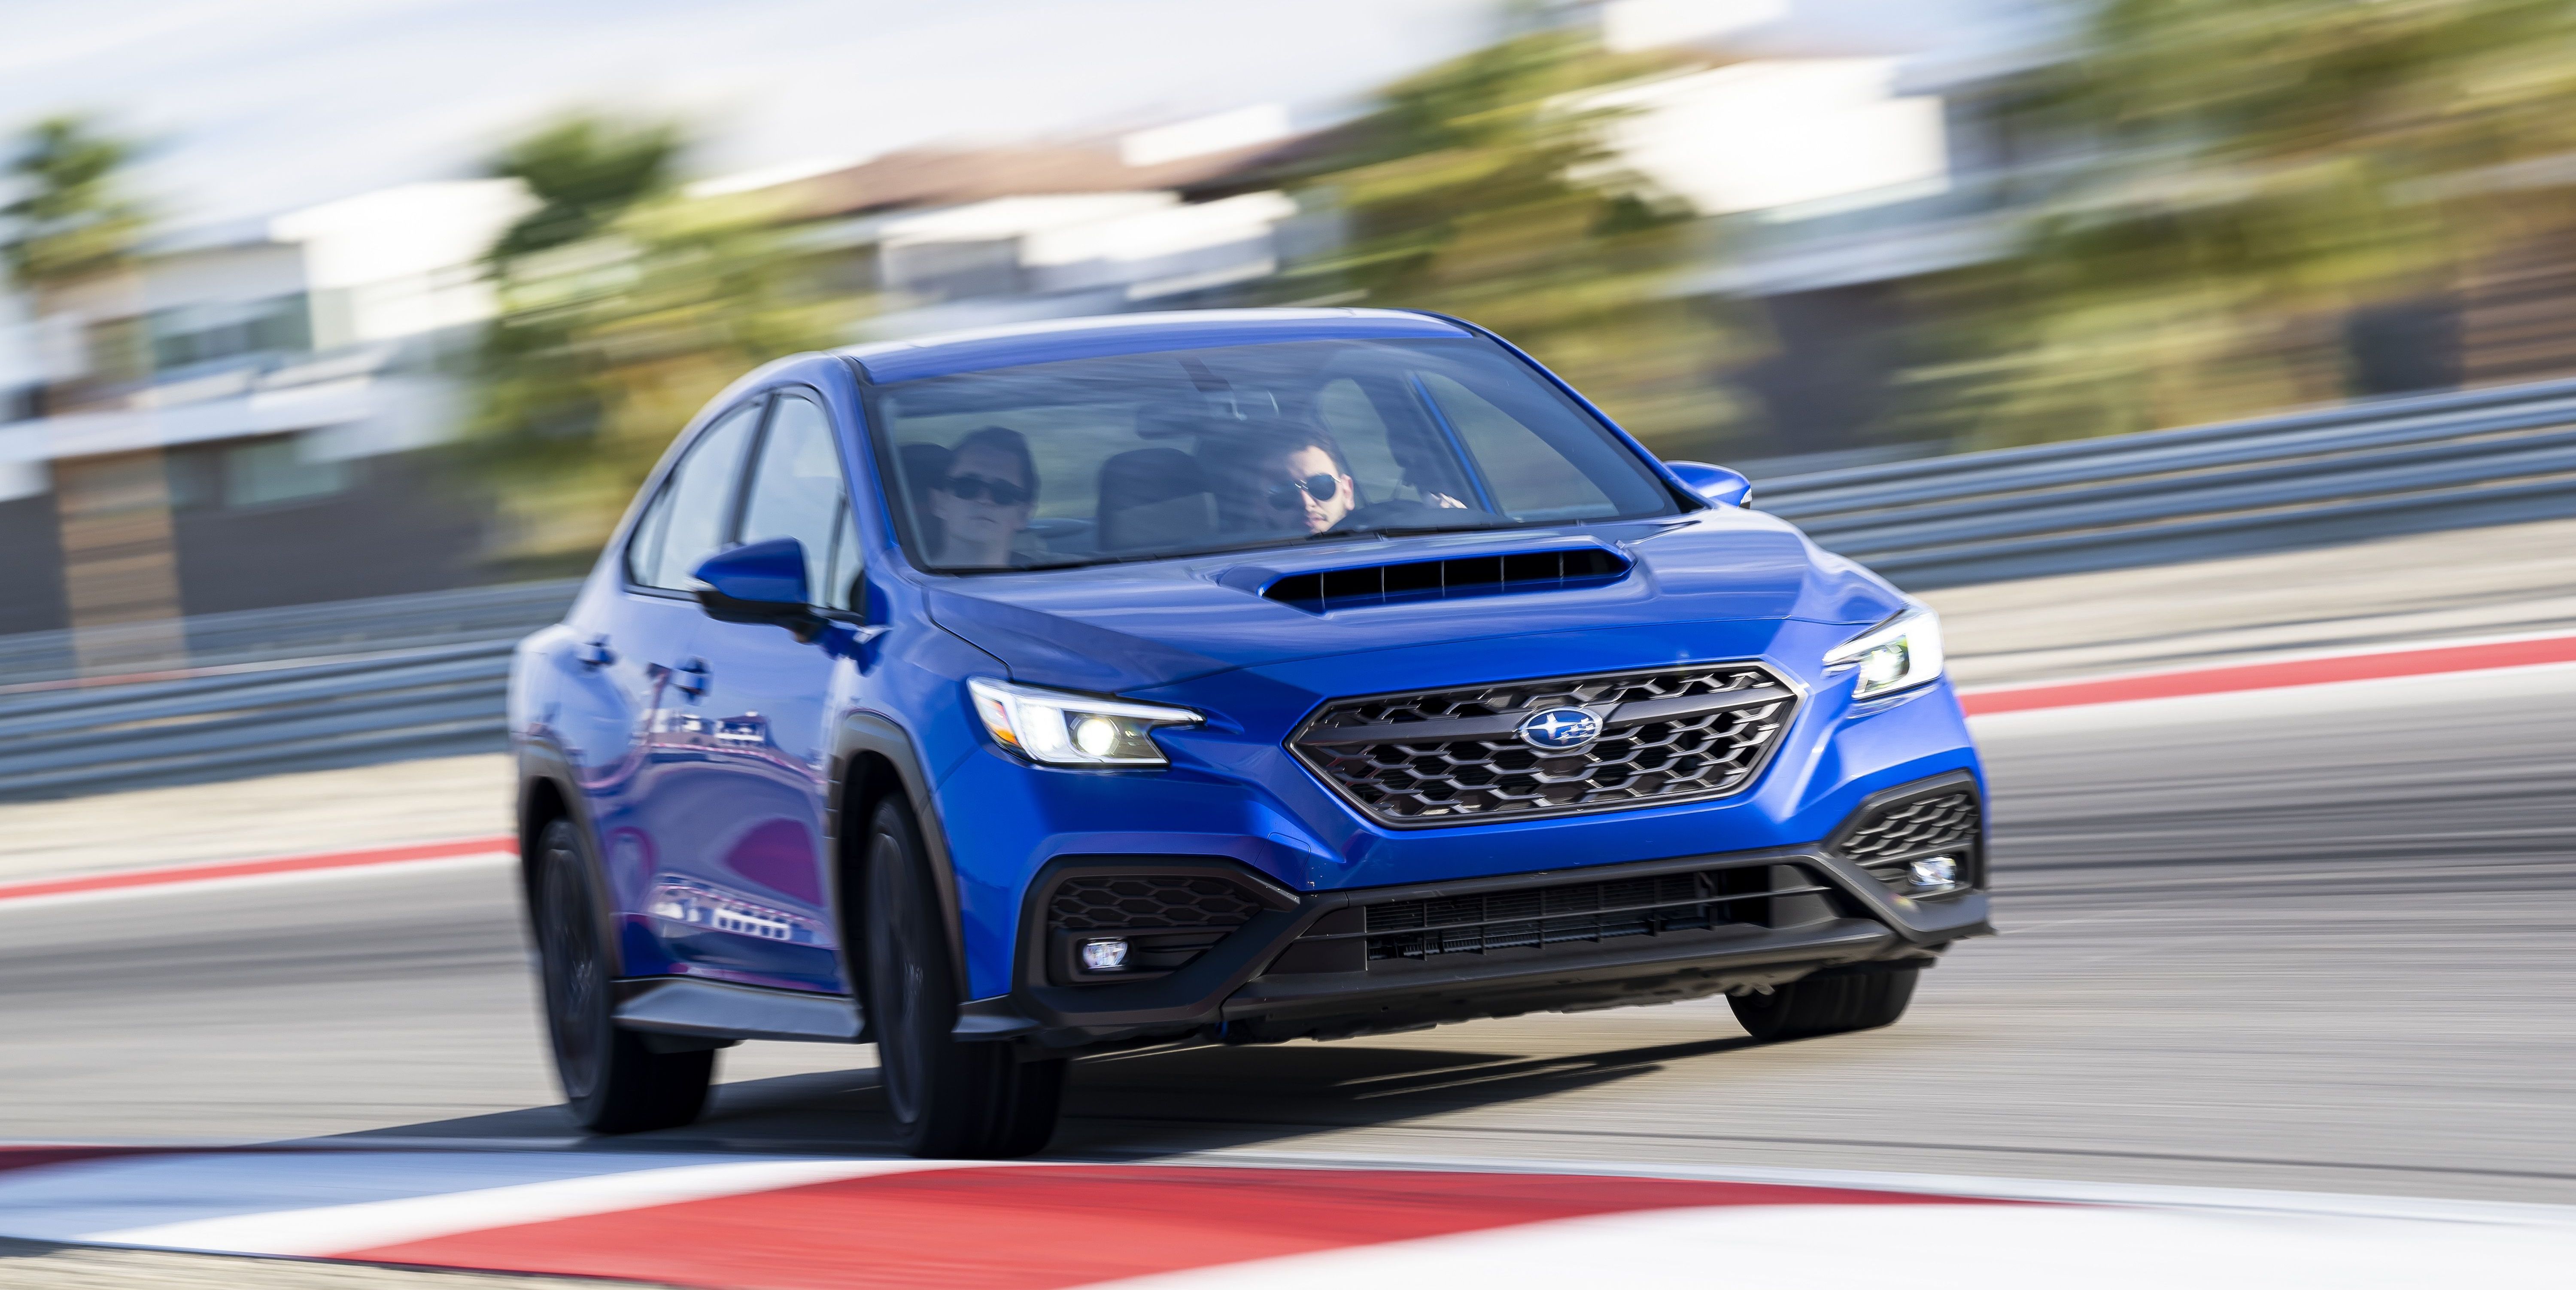 Here's Why Subaru Canned the New STI